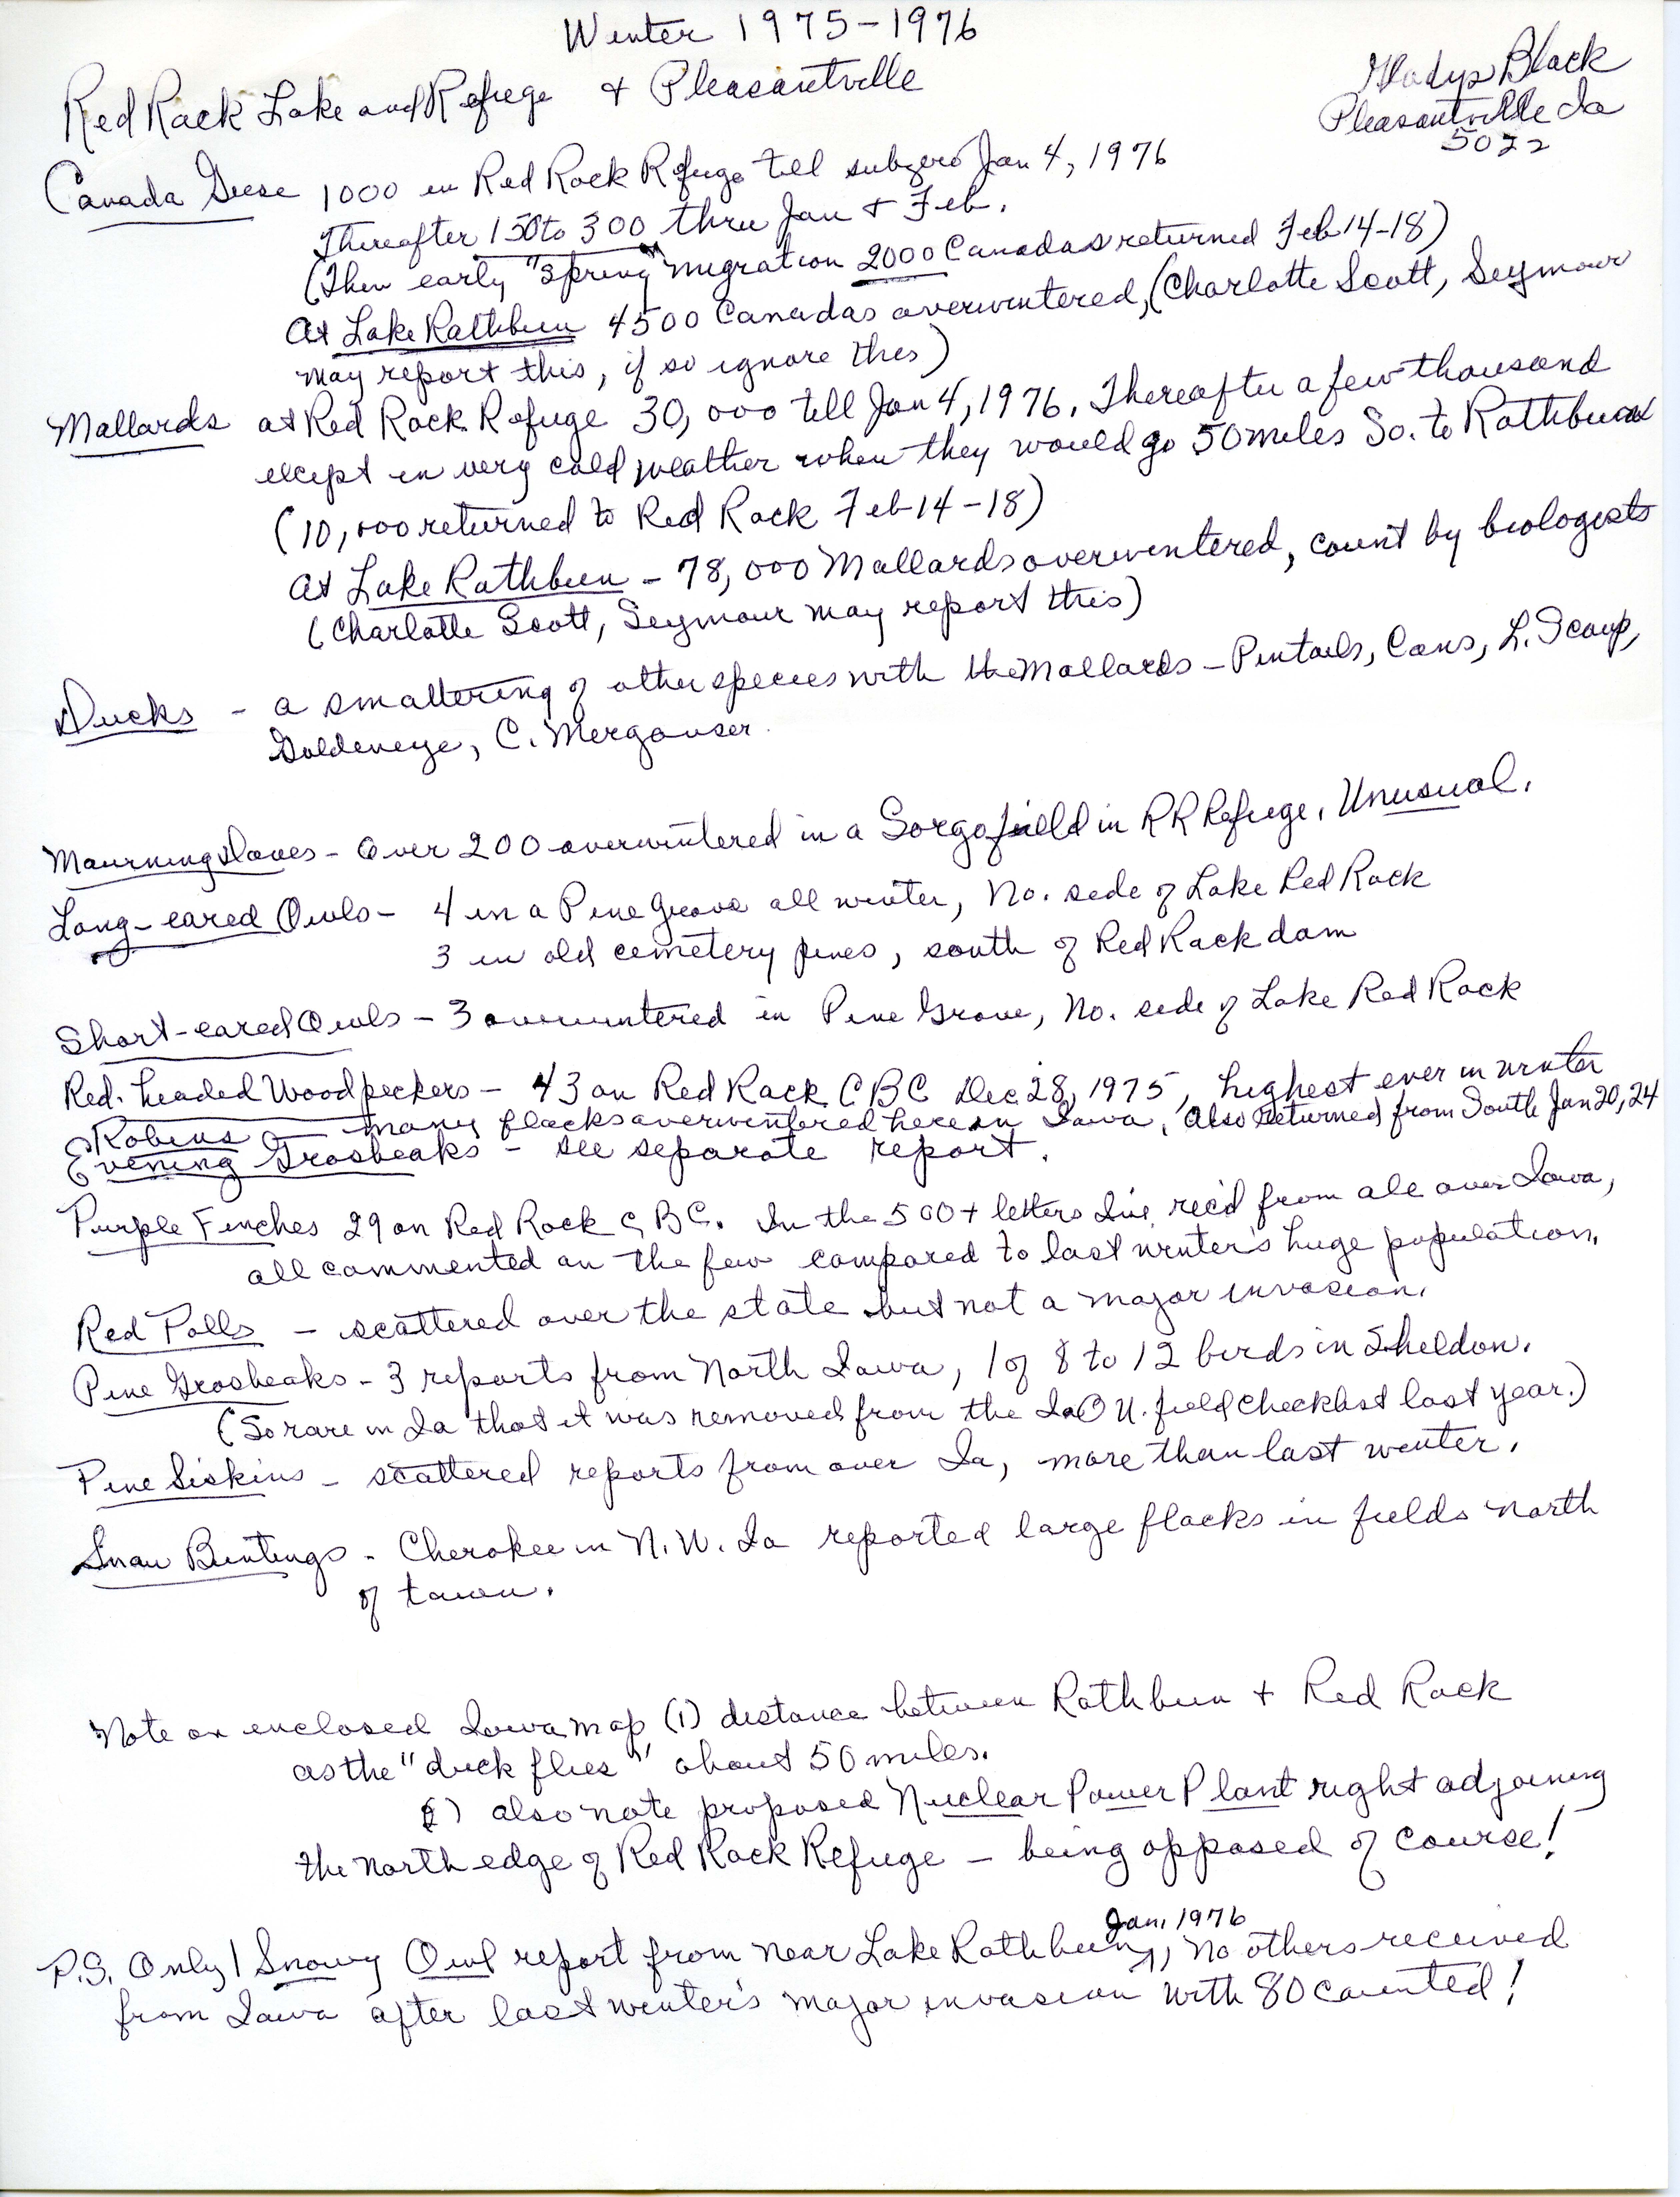 Gladys Black's notes on Red Rock Lake and Refuge and Pleasantville winter bird sightings